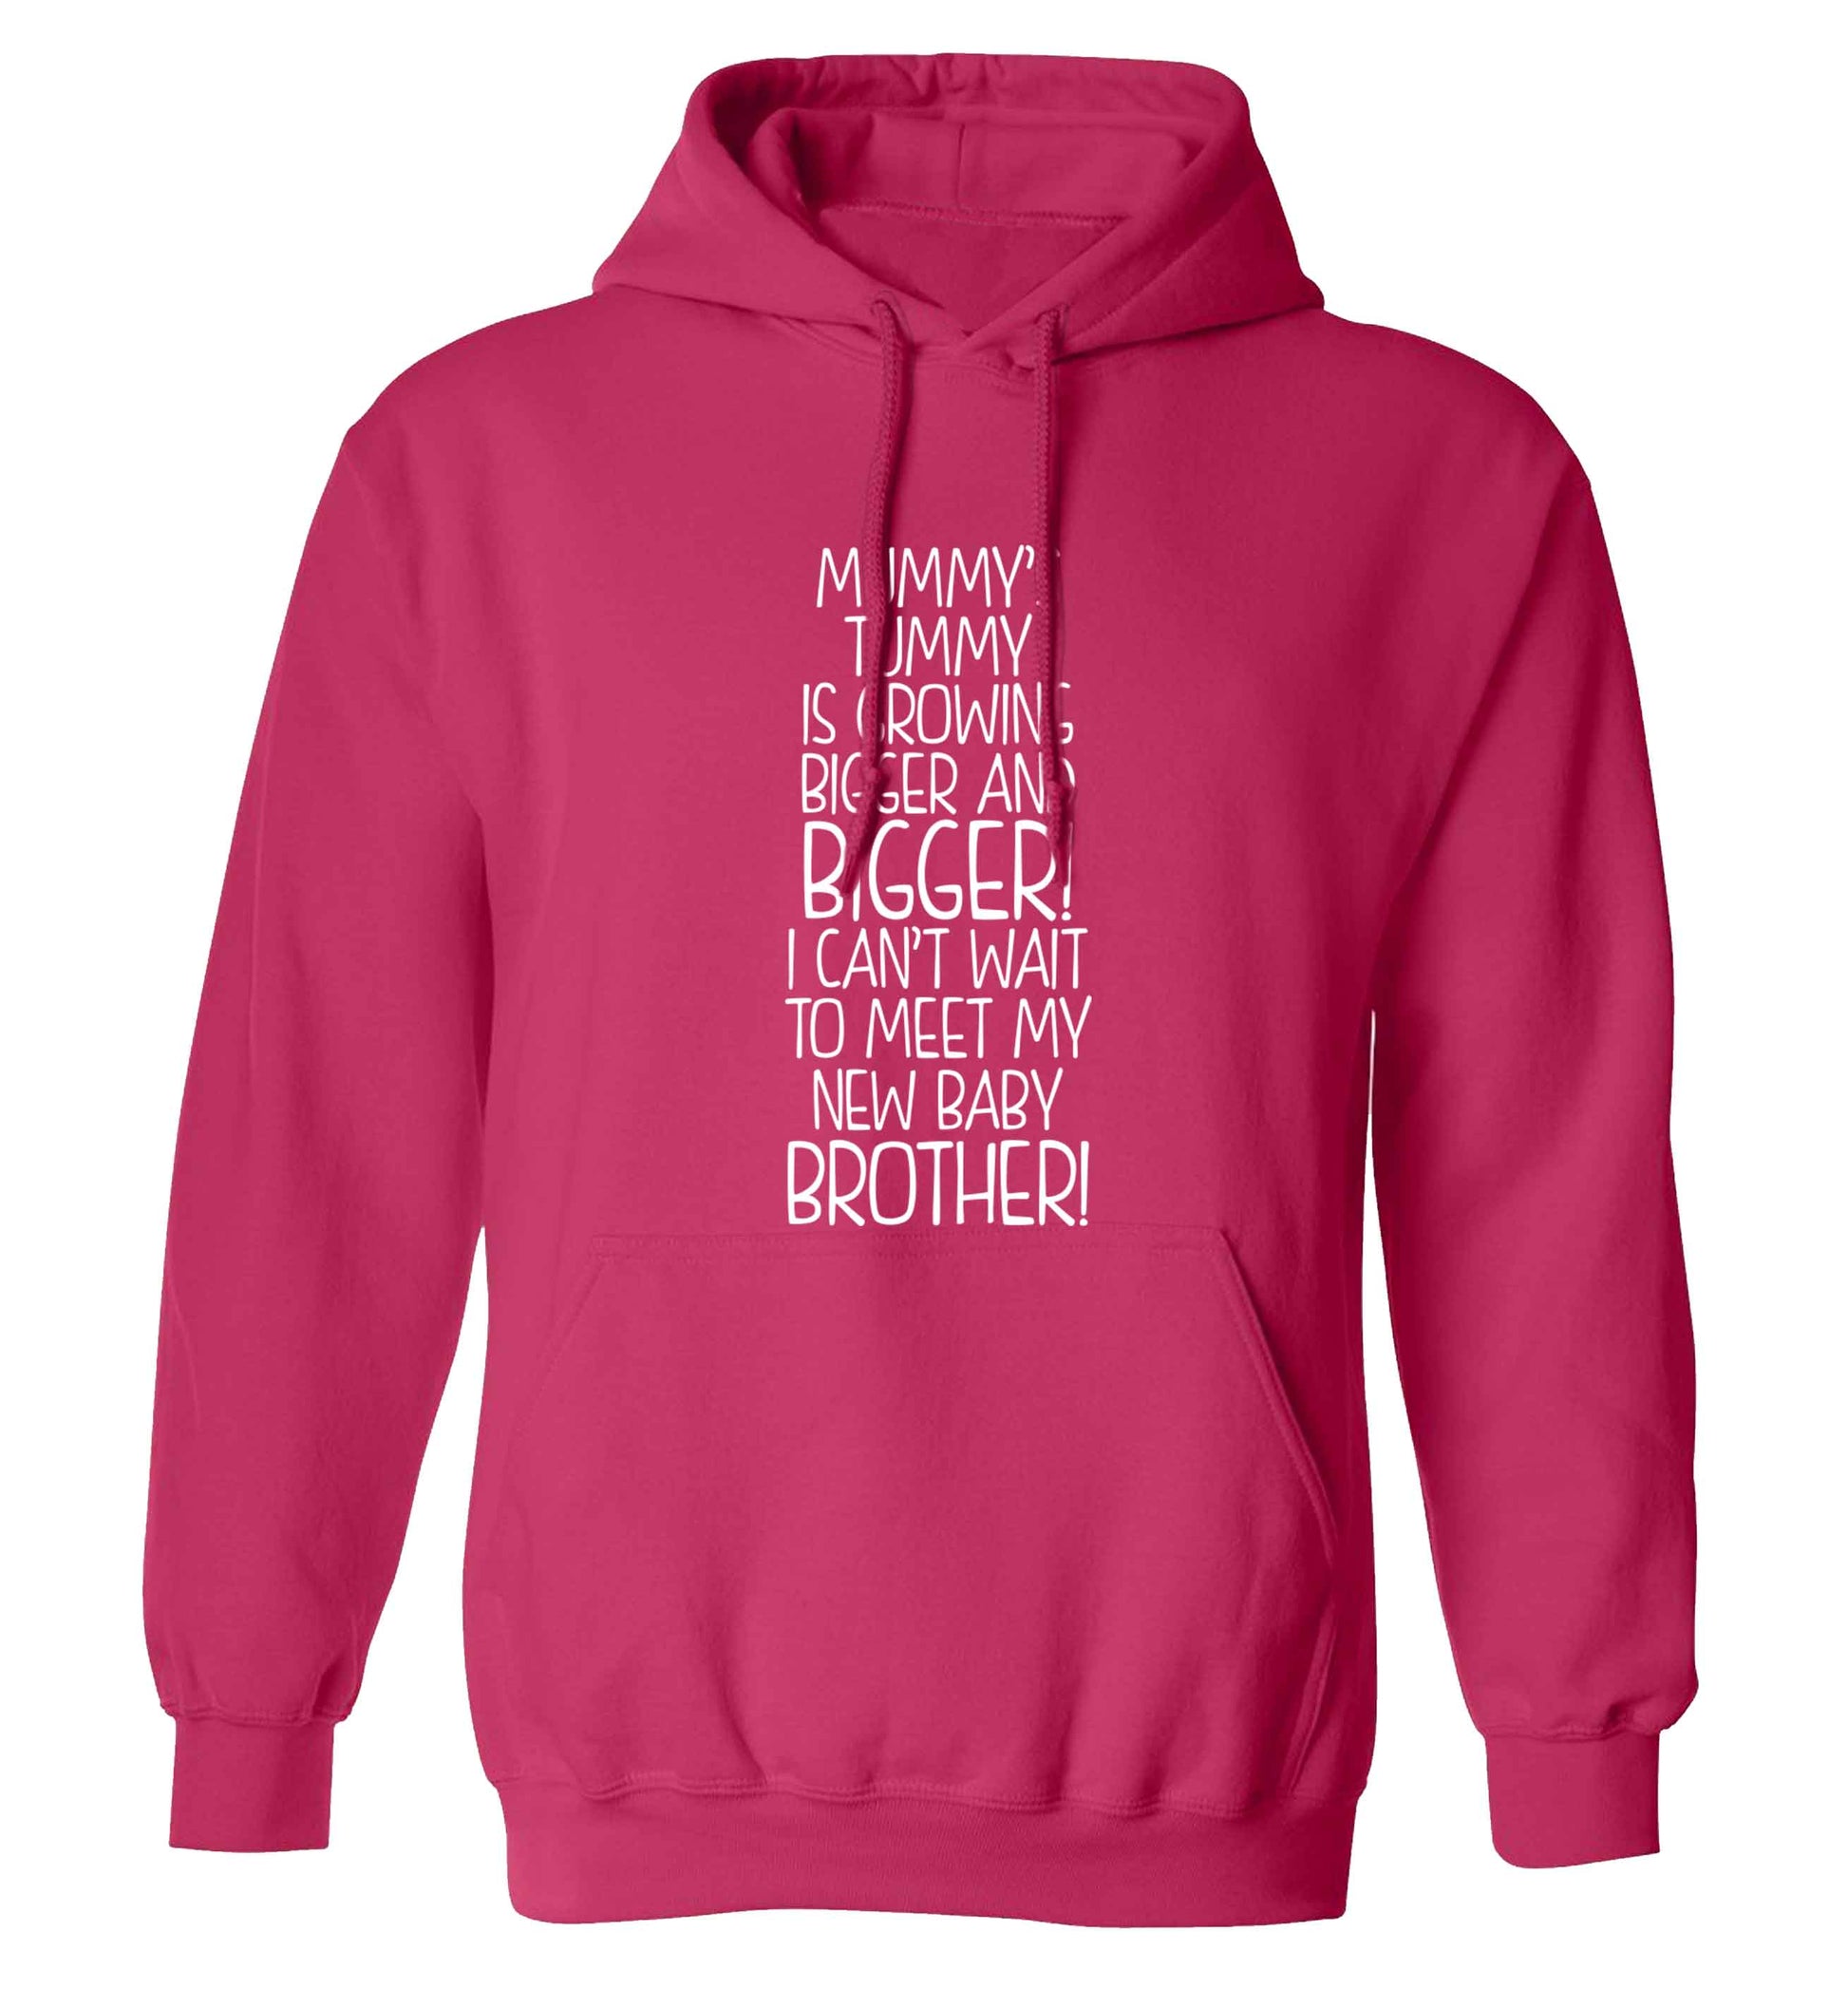 Mummy's tummy is growing bigger and bigger I can't wait to meet my new baby brother! adults unisex pink hoodie 2XL